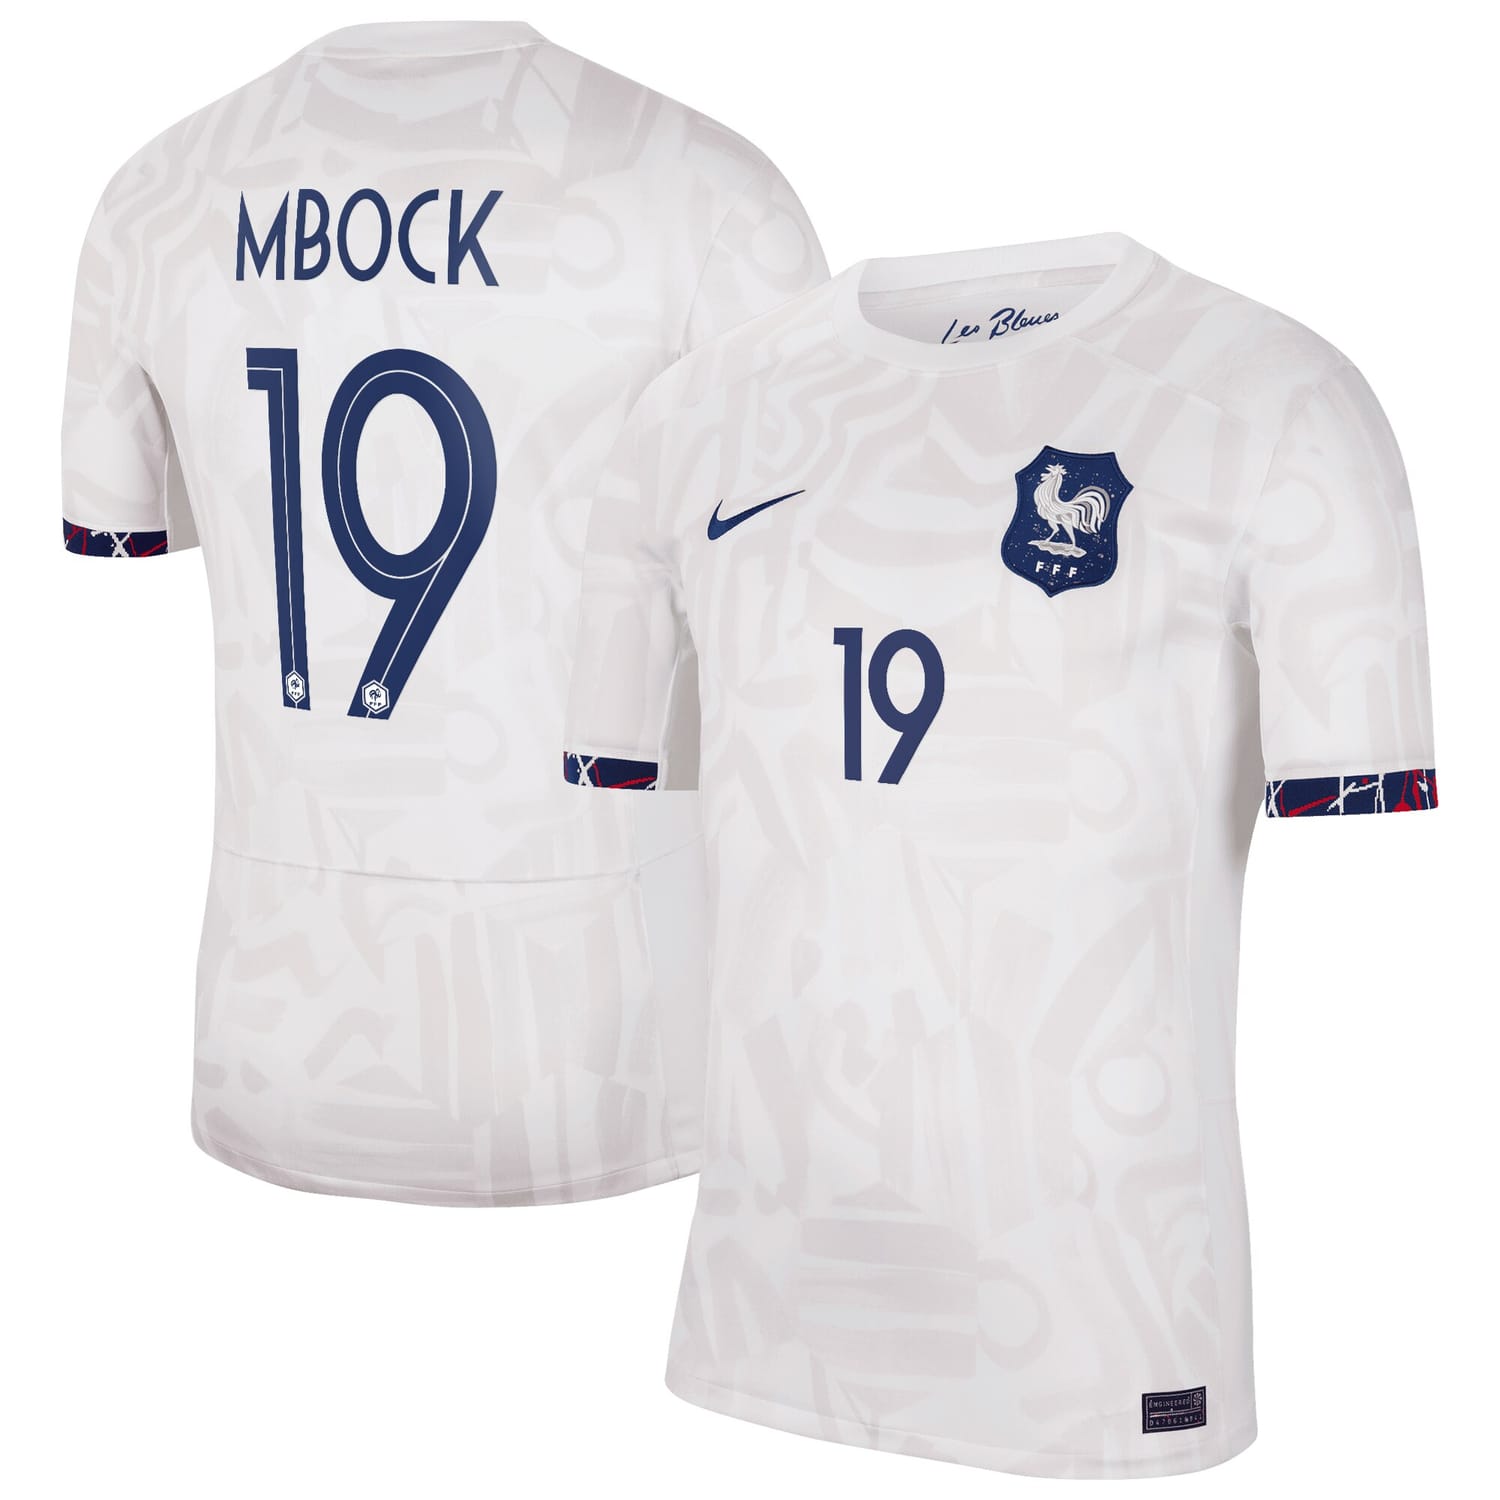 France National Team Away Jersey Shirt 2023-24 player Griedge Mbock 19 printing for Men